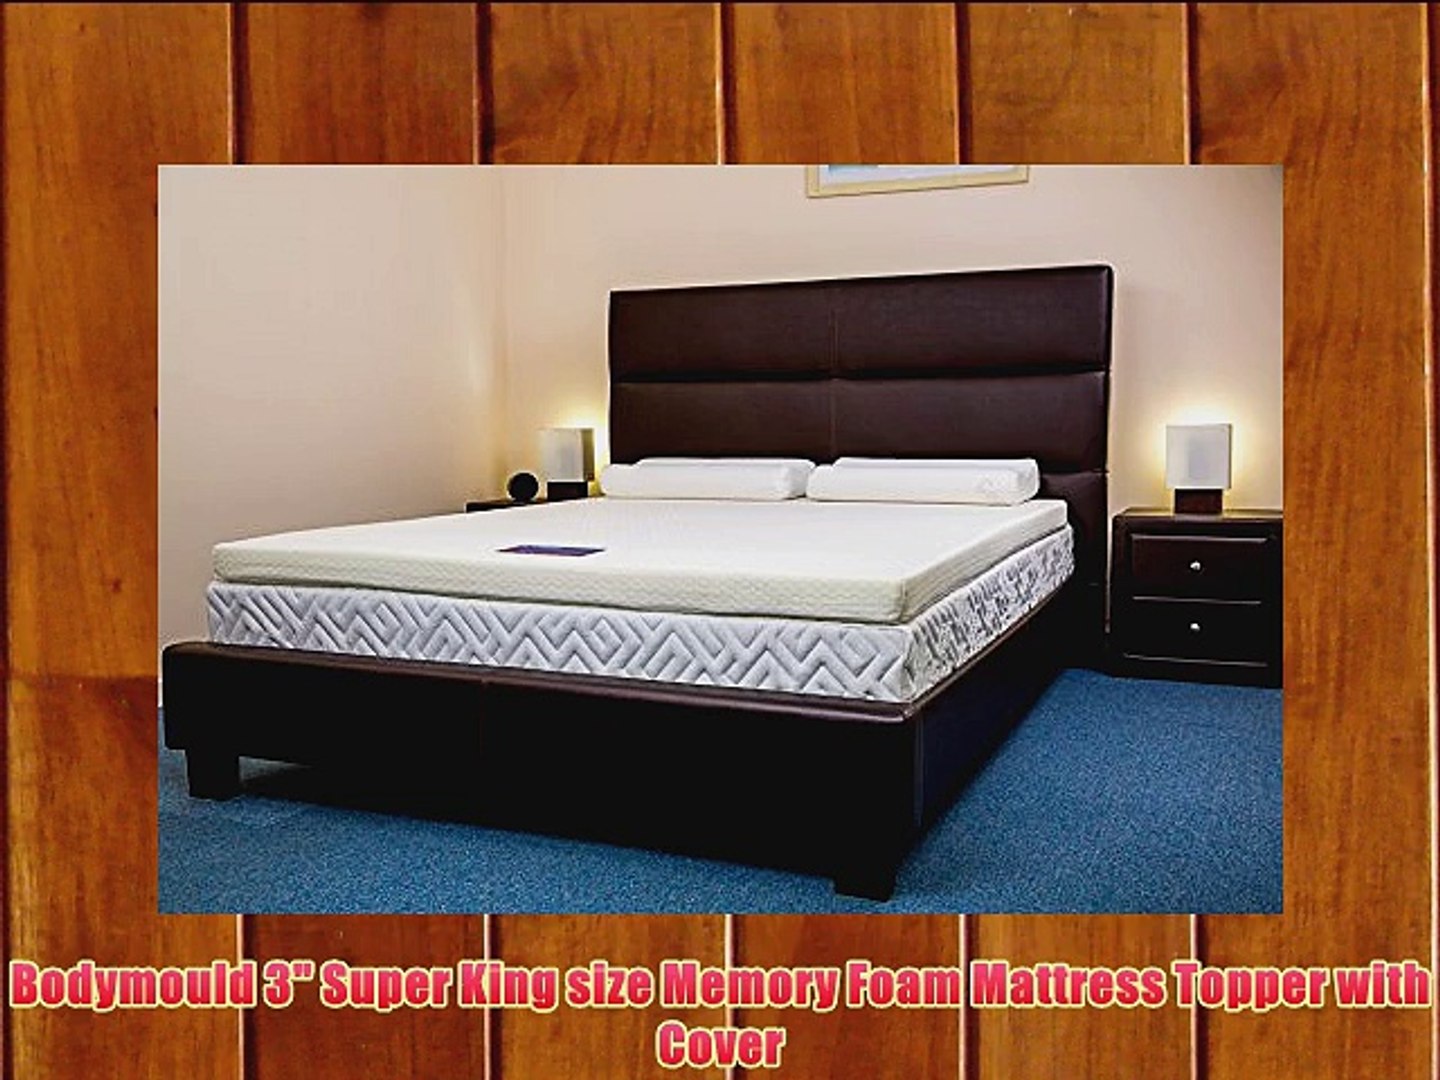 Bodymould 3 Super King Size Memory Foam Mattress Topper With Cover Video Dailymotion